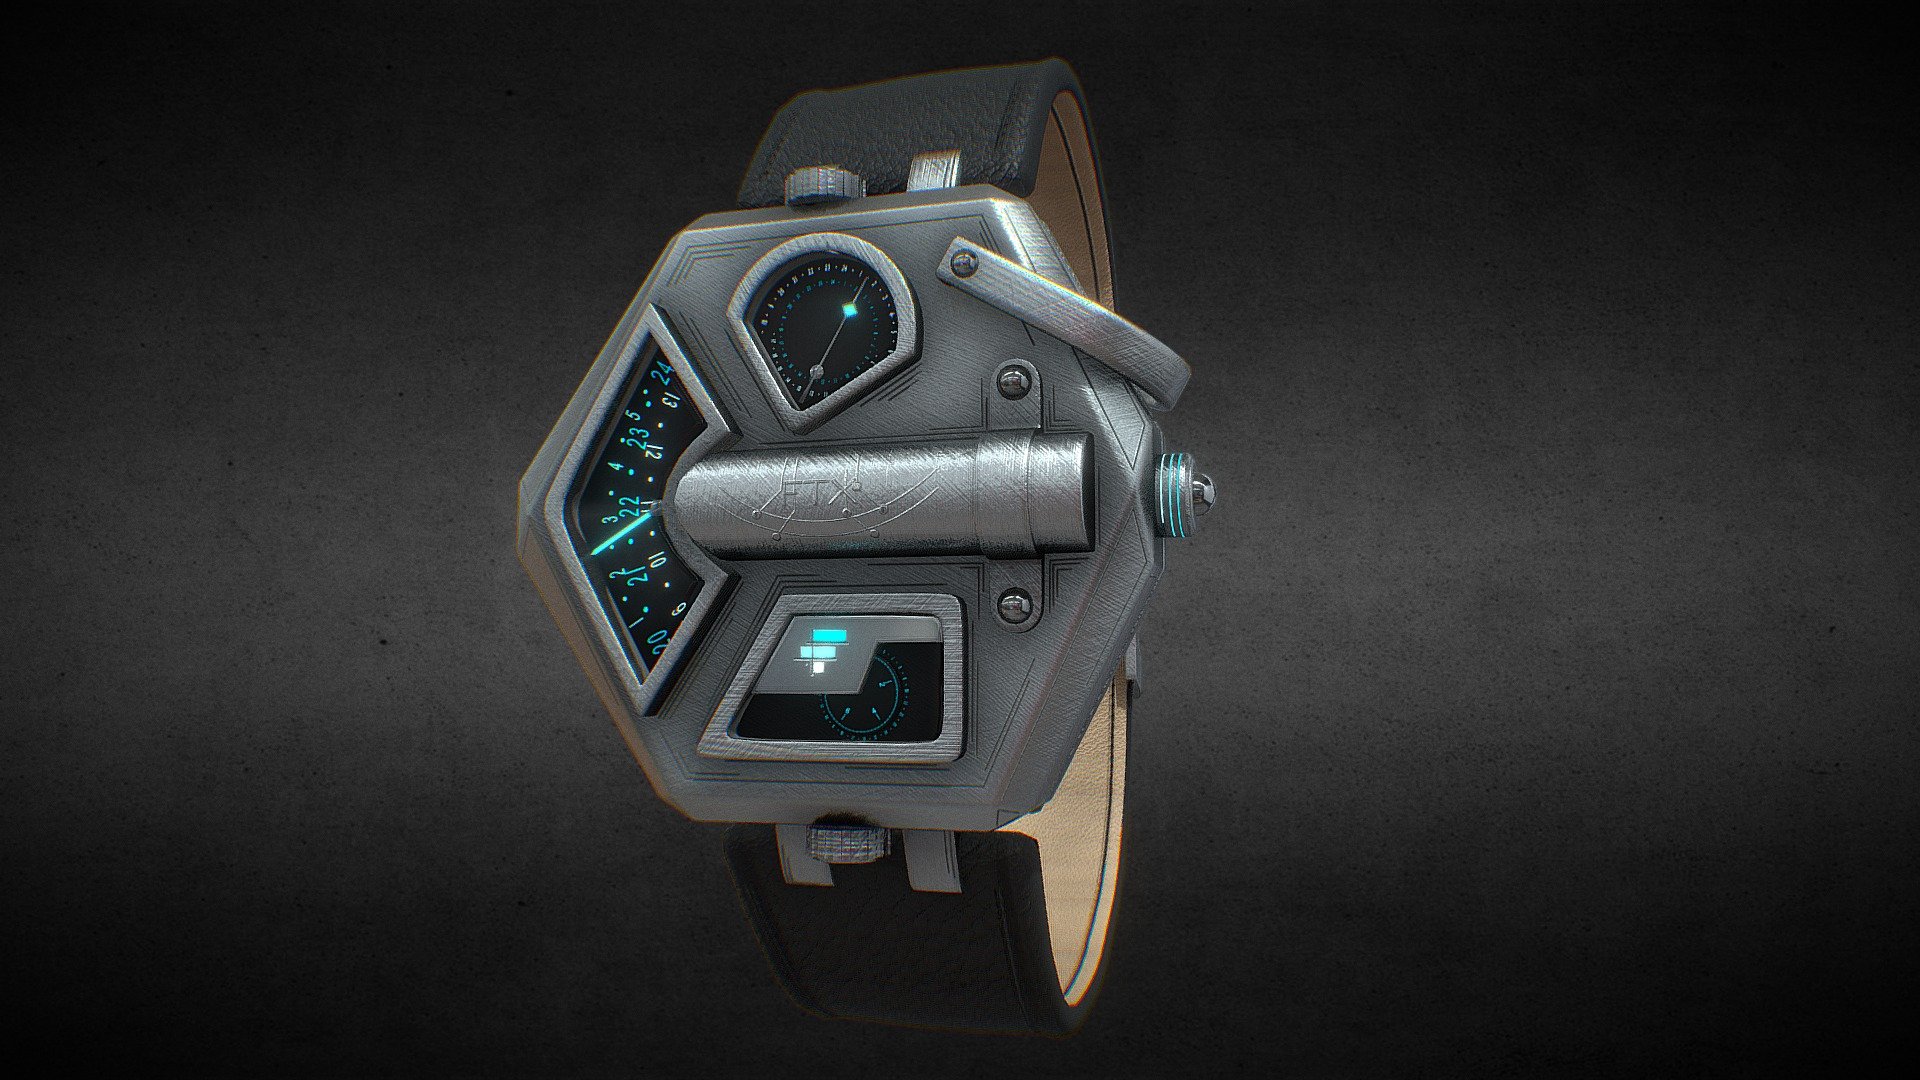 Awersome stainless steel FTX Token coin Watch.

Currently available for download in FBX format.

3D model developed by AR-Watches 3d model